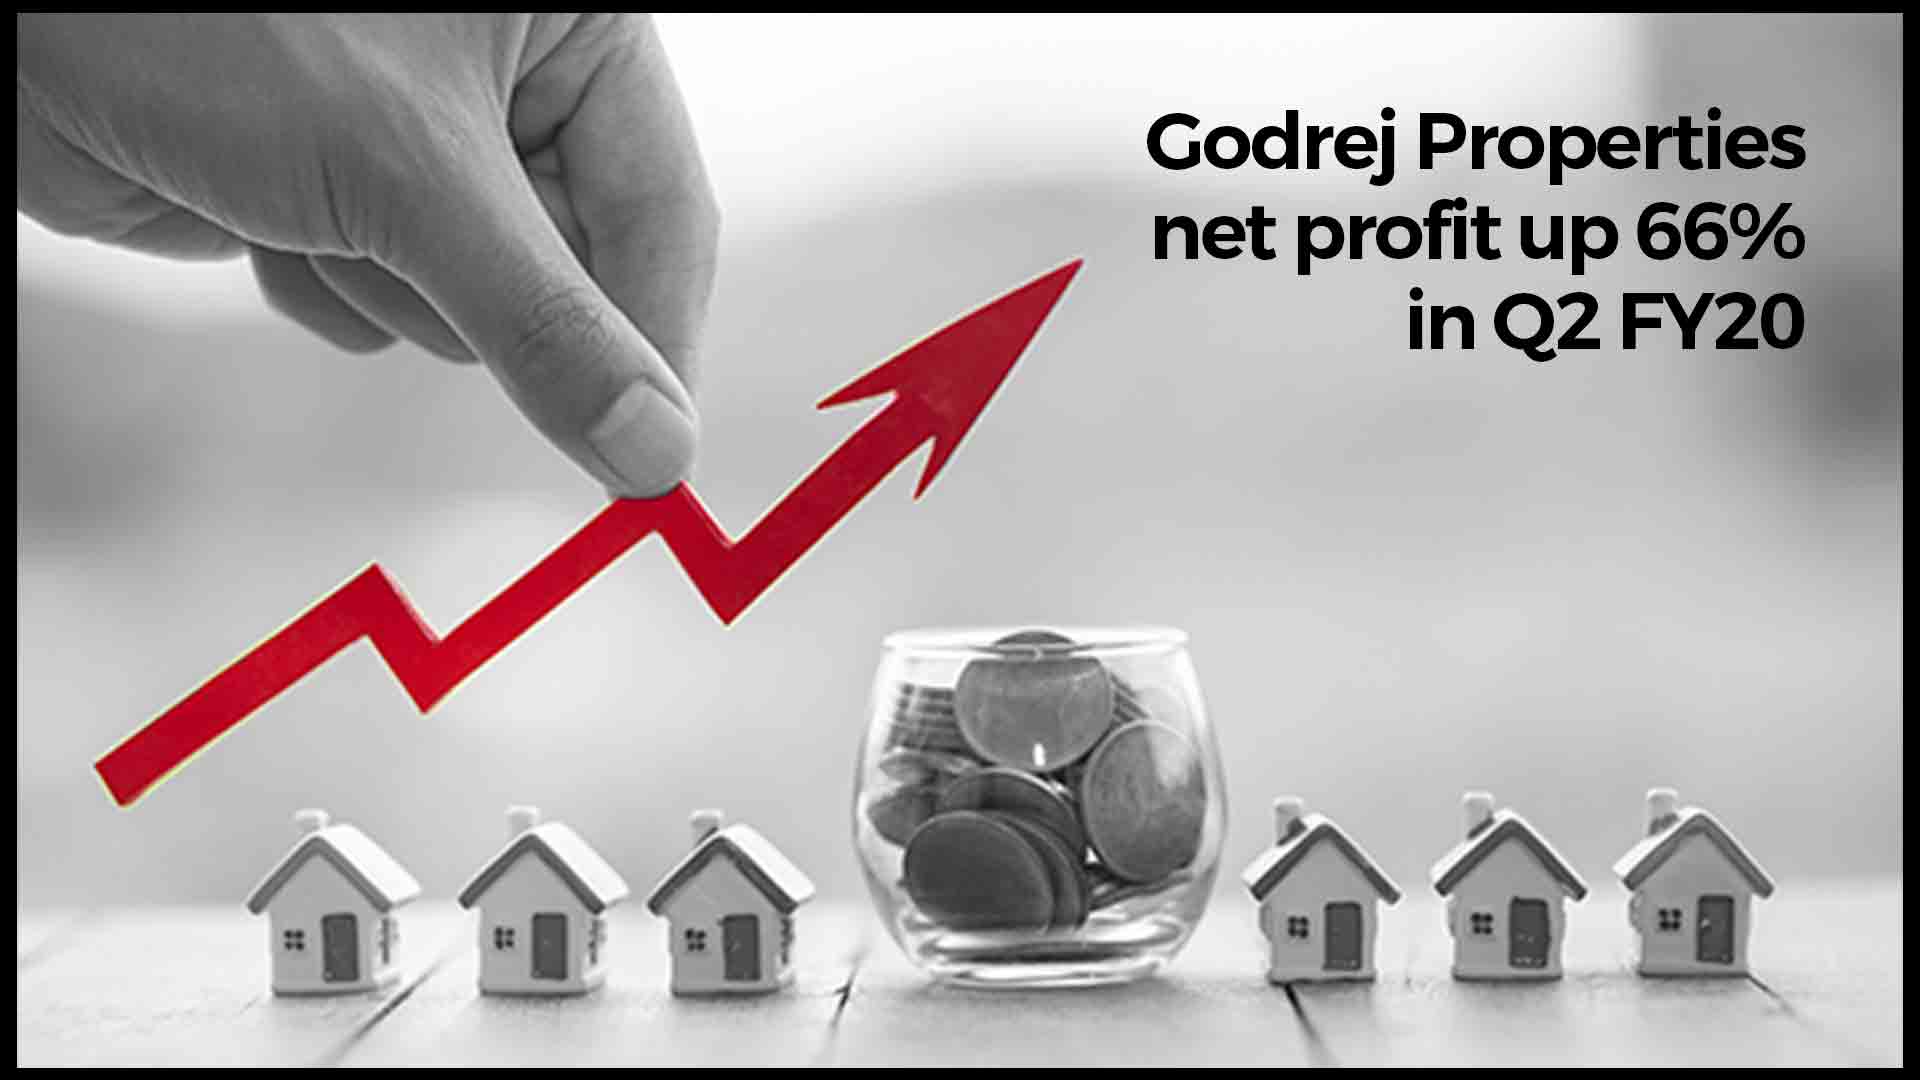 godrej-properties-reported-growth-of-66-in-its-net-profit-realtynxt